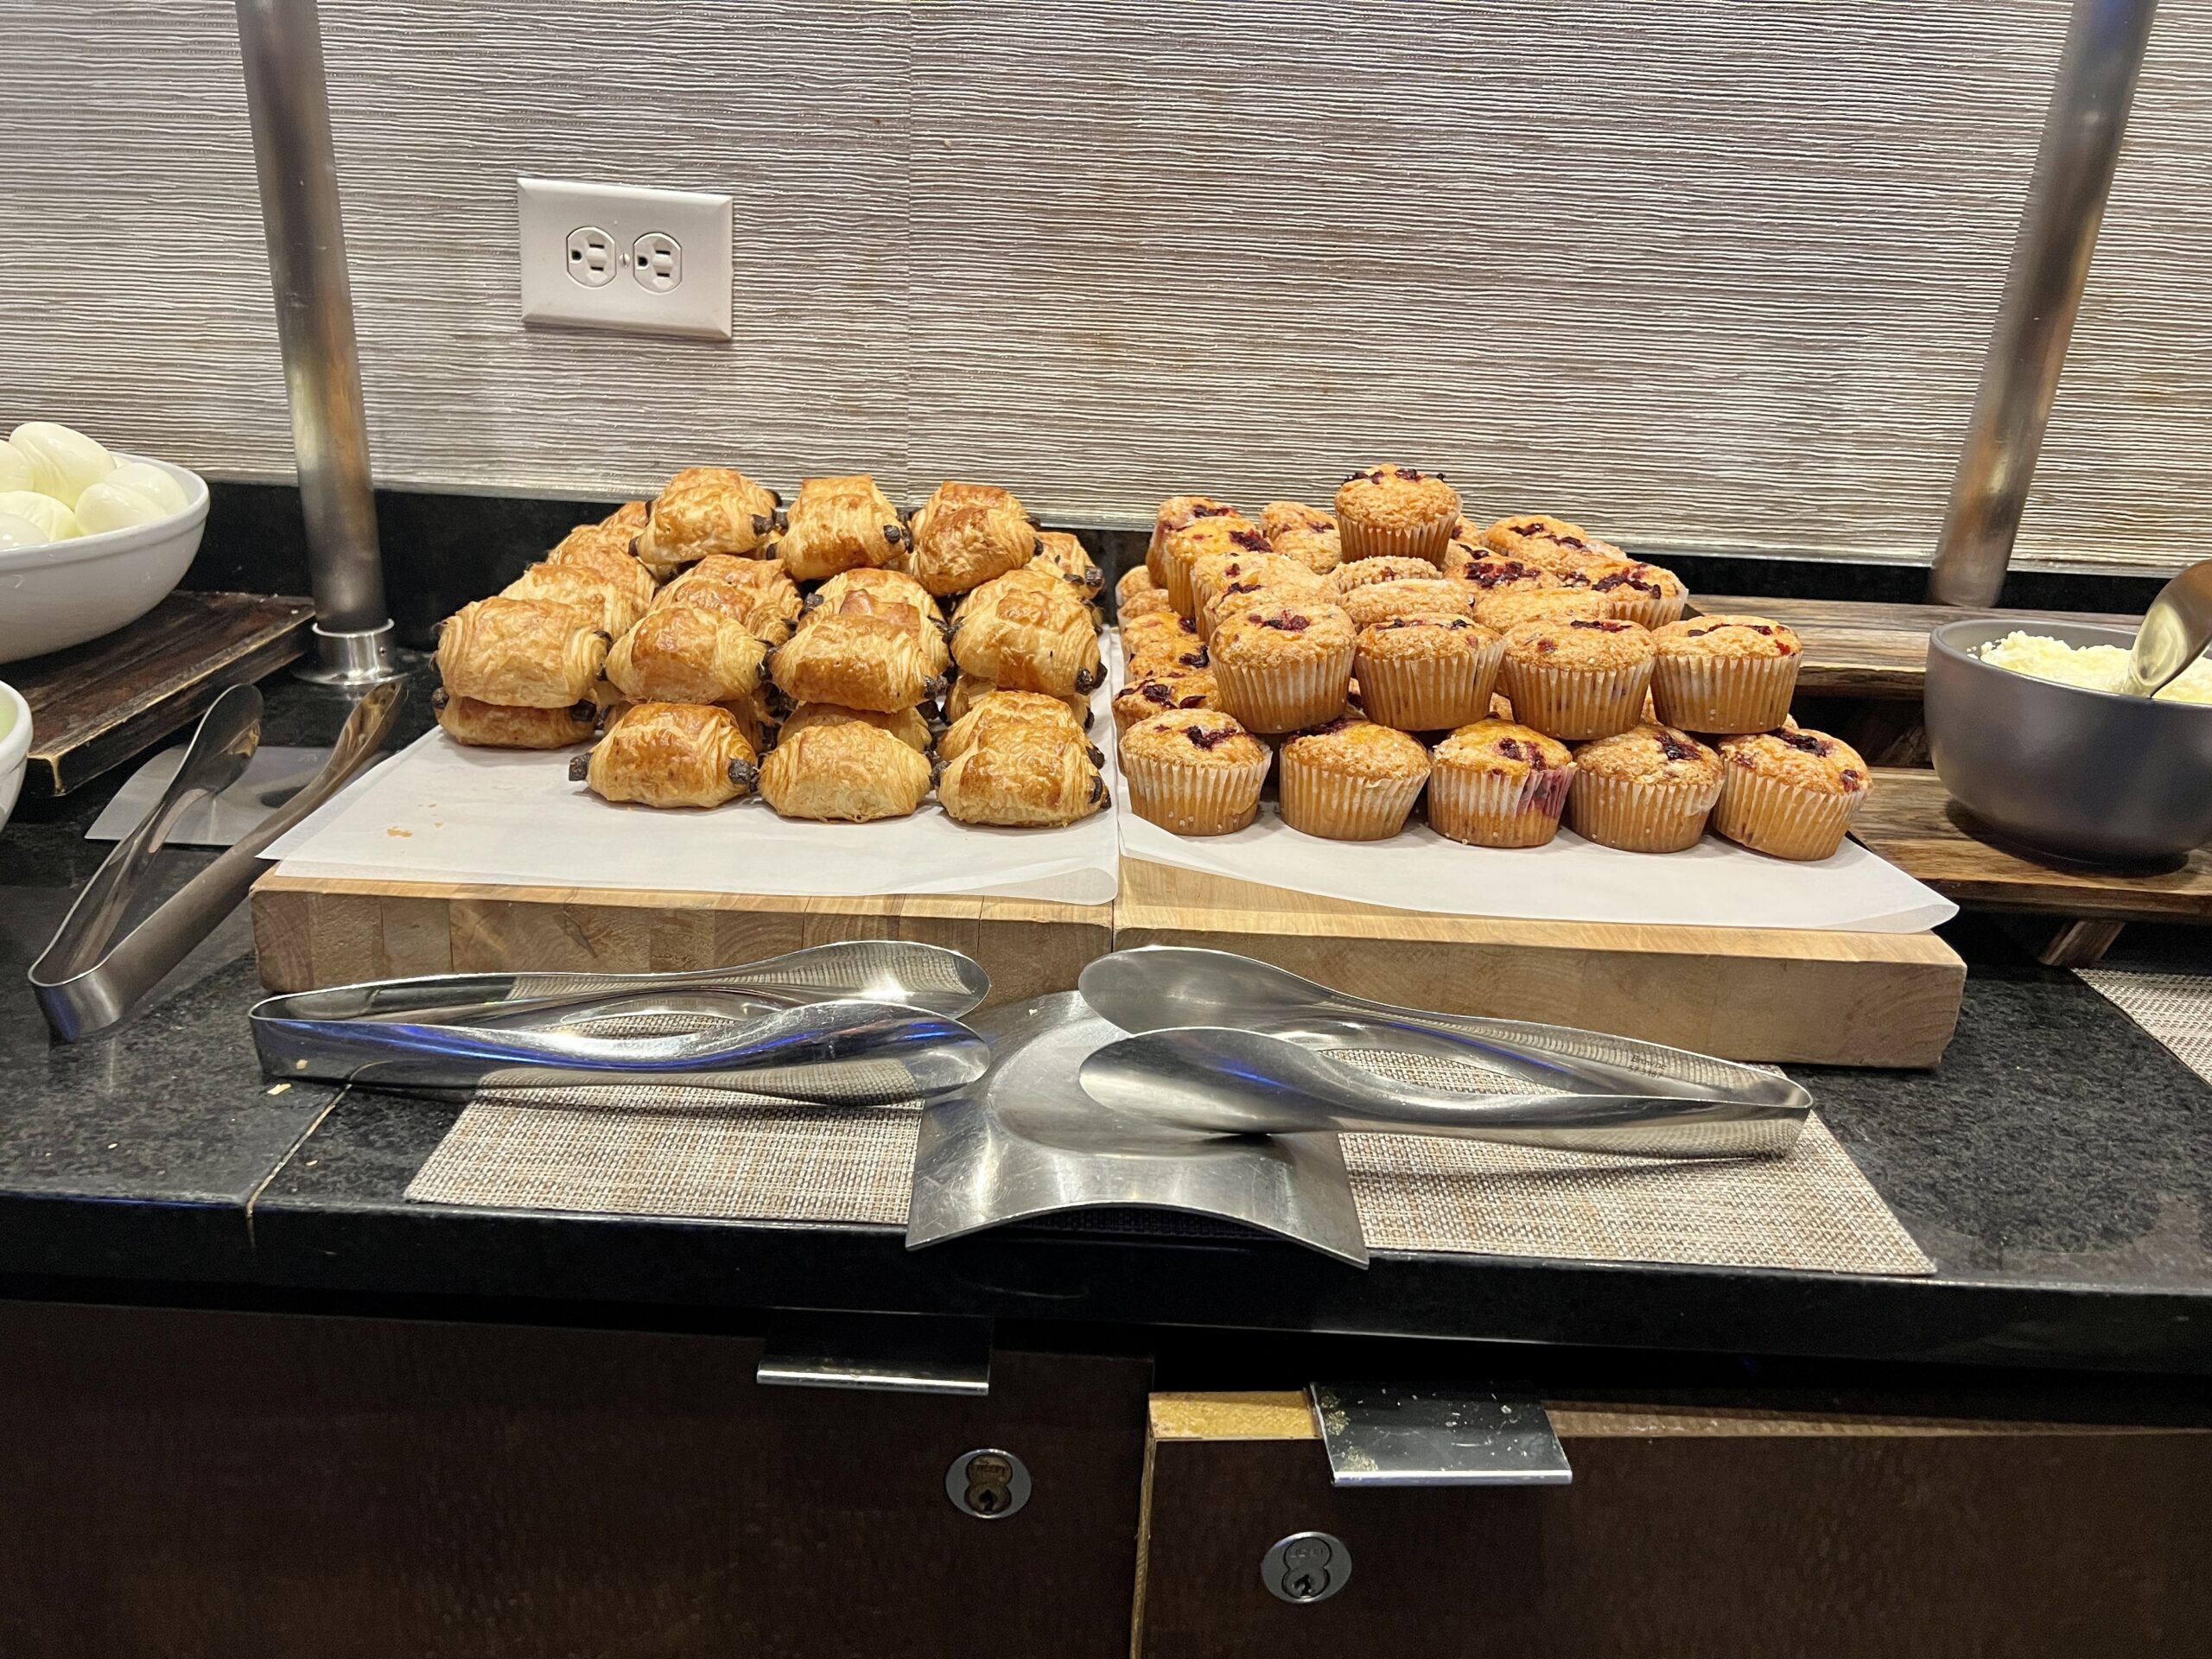 Delta Sky Club ATL A17 Pain au Chocolat and Muffins